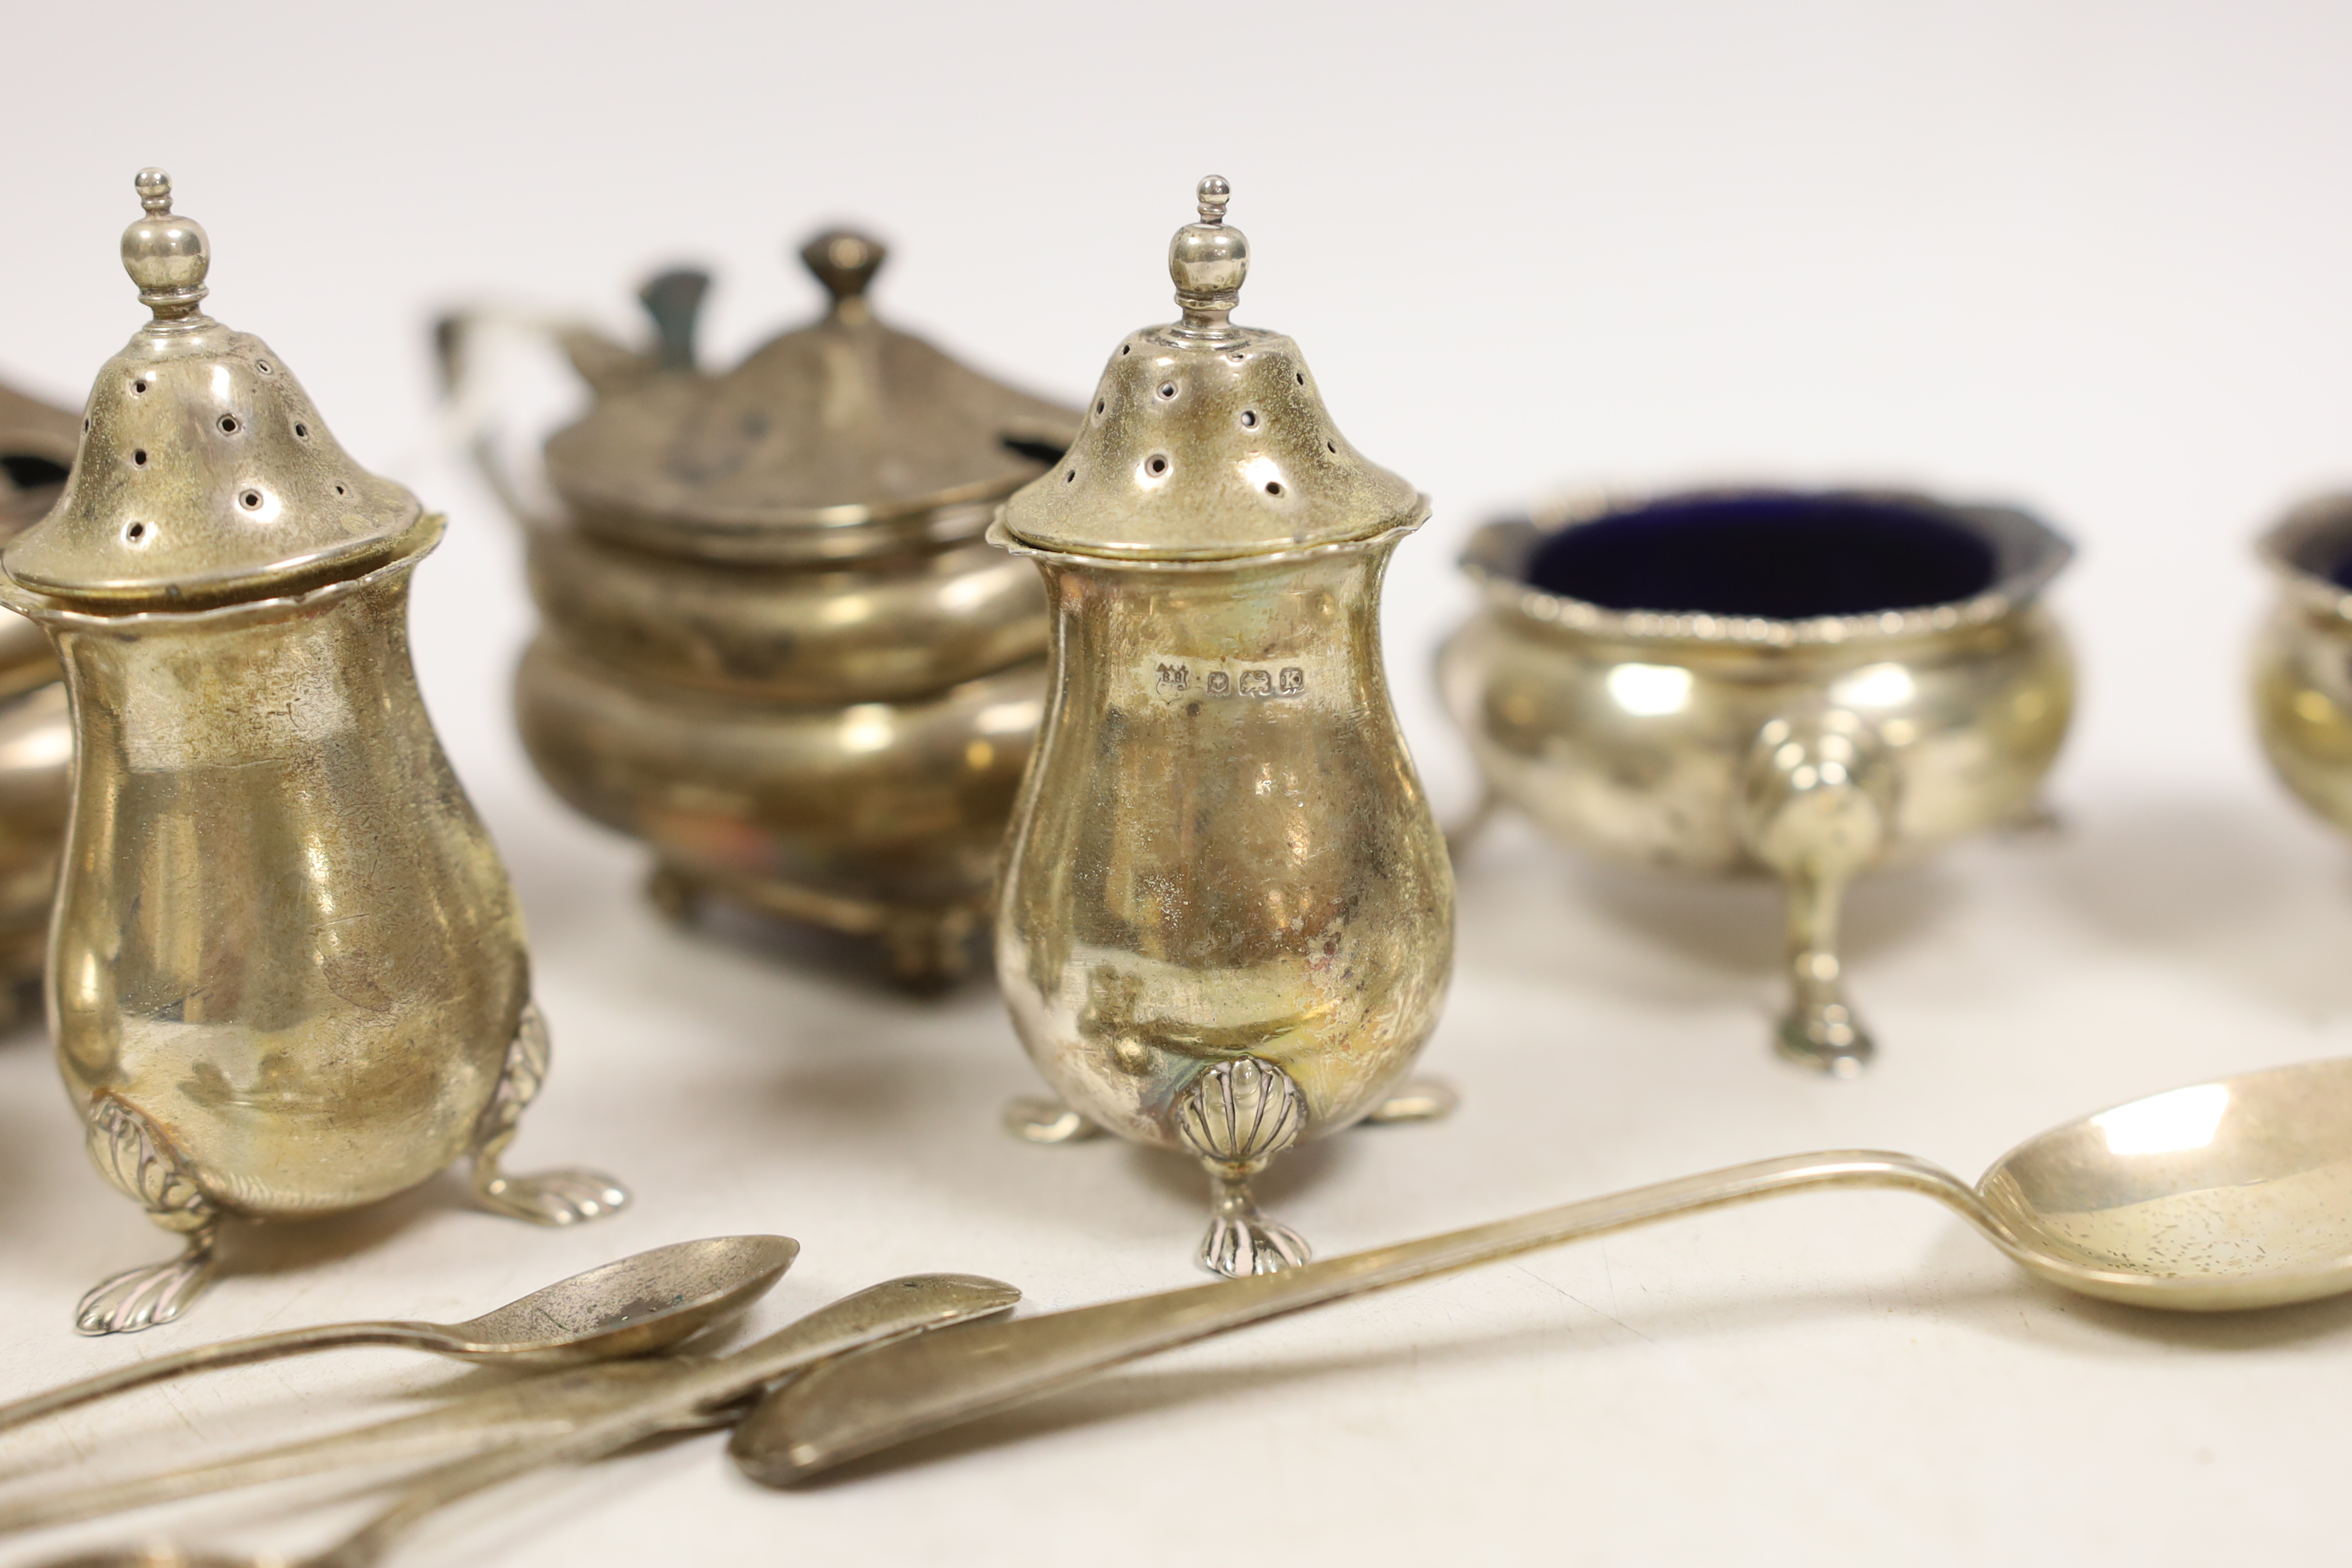 A pair of George V oblong silver lidded mustards with blue glass liners, two other mustards, a pair of peppers, a pair of 'cauldron' salts, three condiment spoons and a teaspoon.